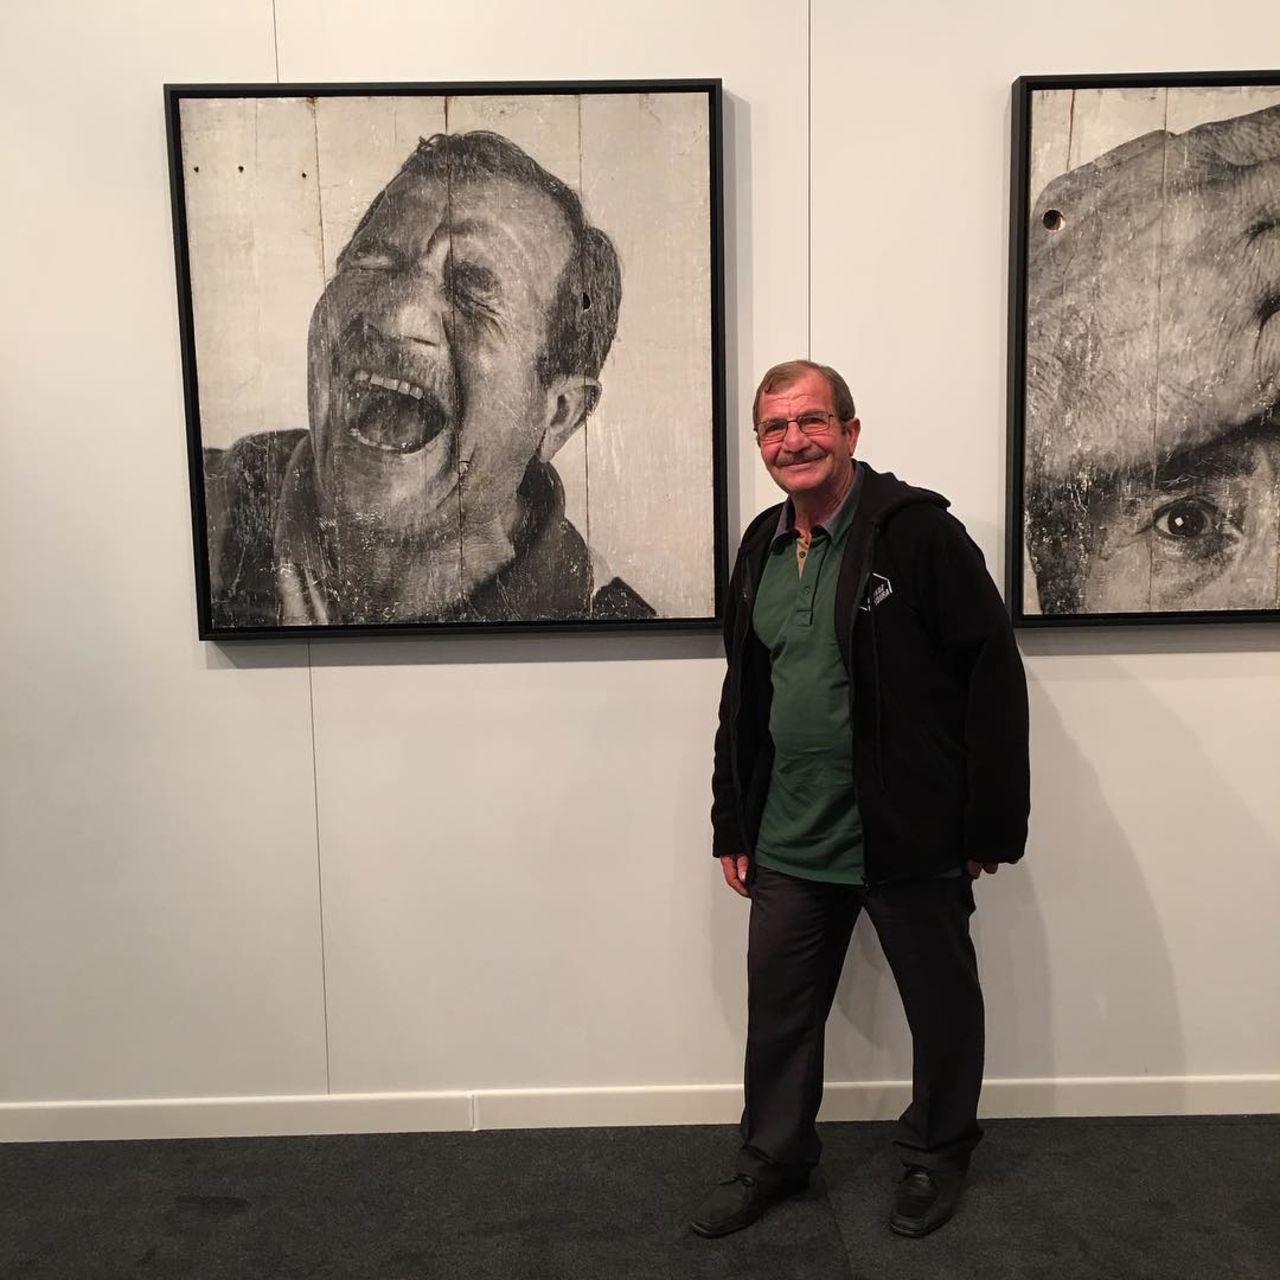 "This wonderful old chap turned up at our Lazarides stand at Contemporary Istanbul last year. Several confused hours and lots of laughter later, we found out he was the model for the JR painting hanging in the show."